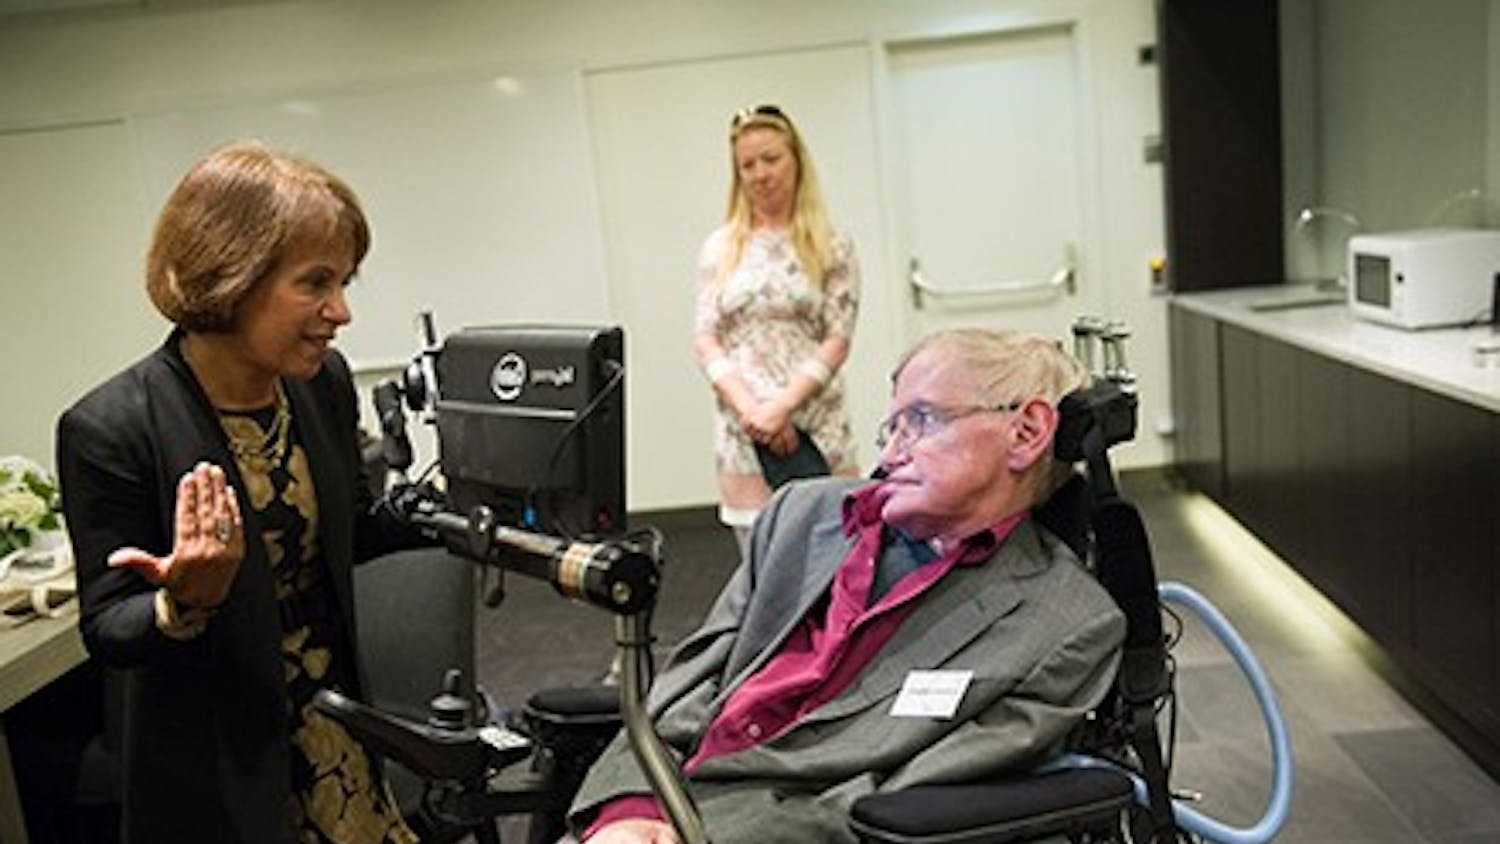 2015 August 24:th  Stephen Hawking Lecture in Waterfront StockholmCopyright: Photographer Ulf Sirborn, Box 38081, 100 64 Stockholm, Sweden,phone +46 720461654, e-mail:ulf.sirborn@brevet.nu